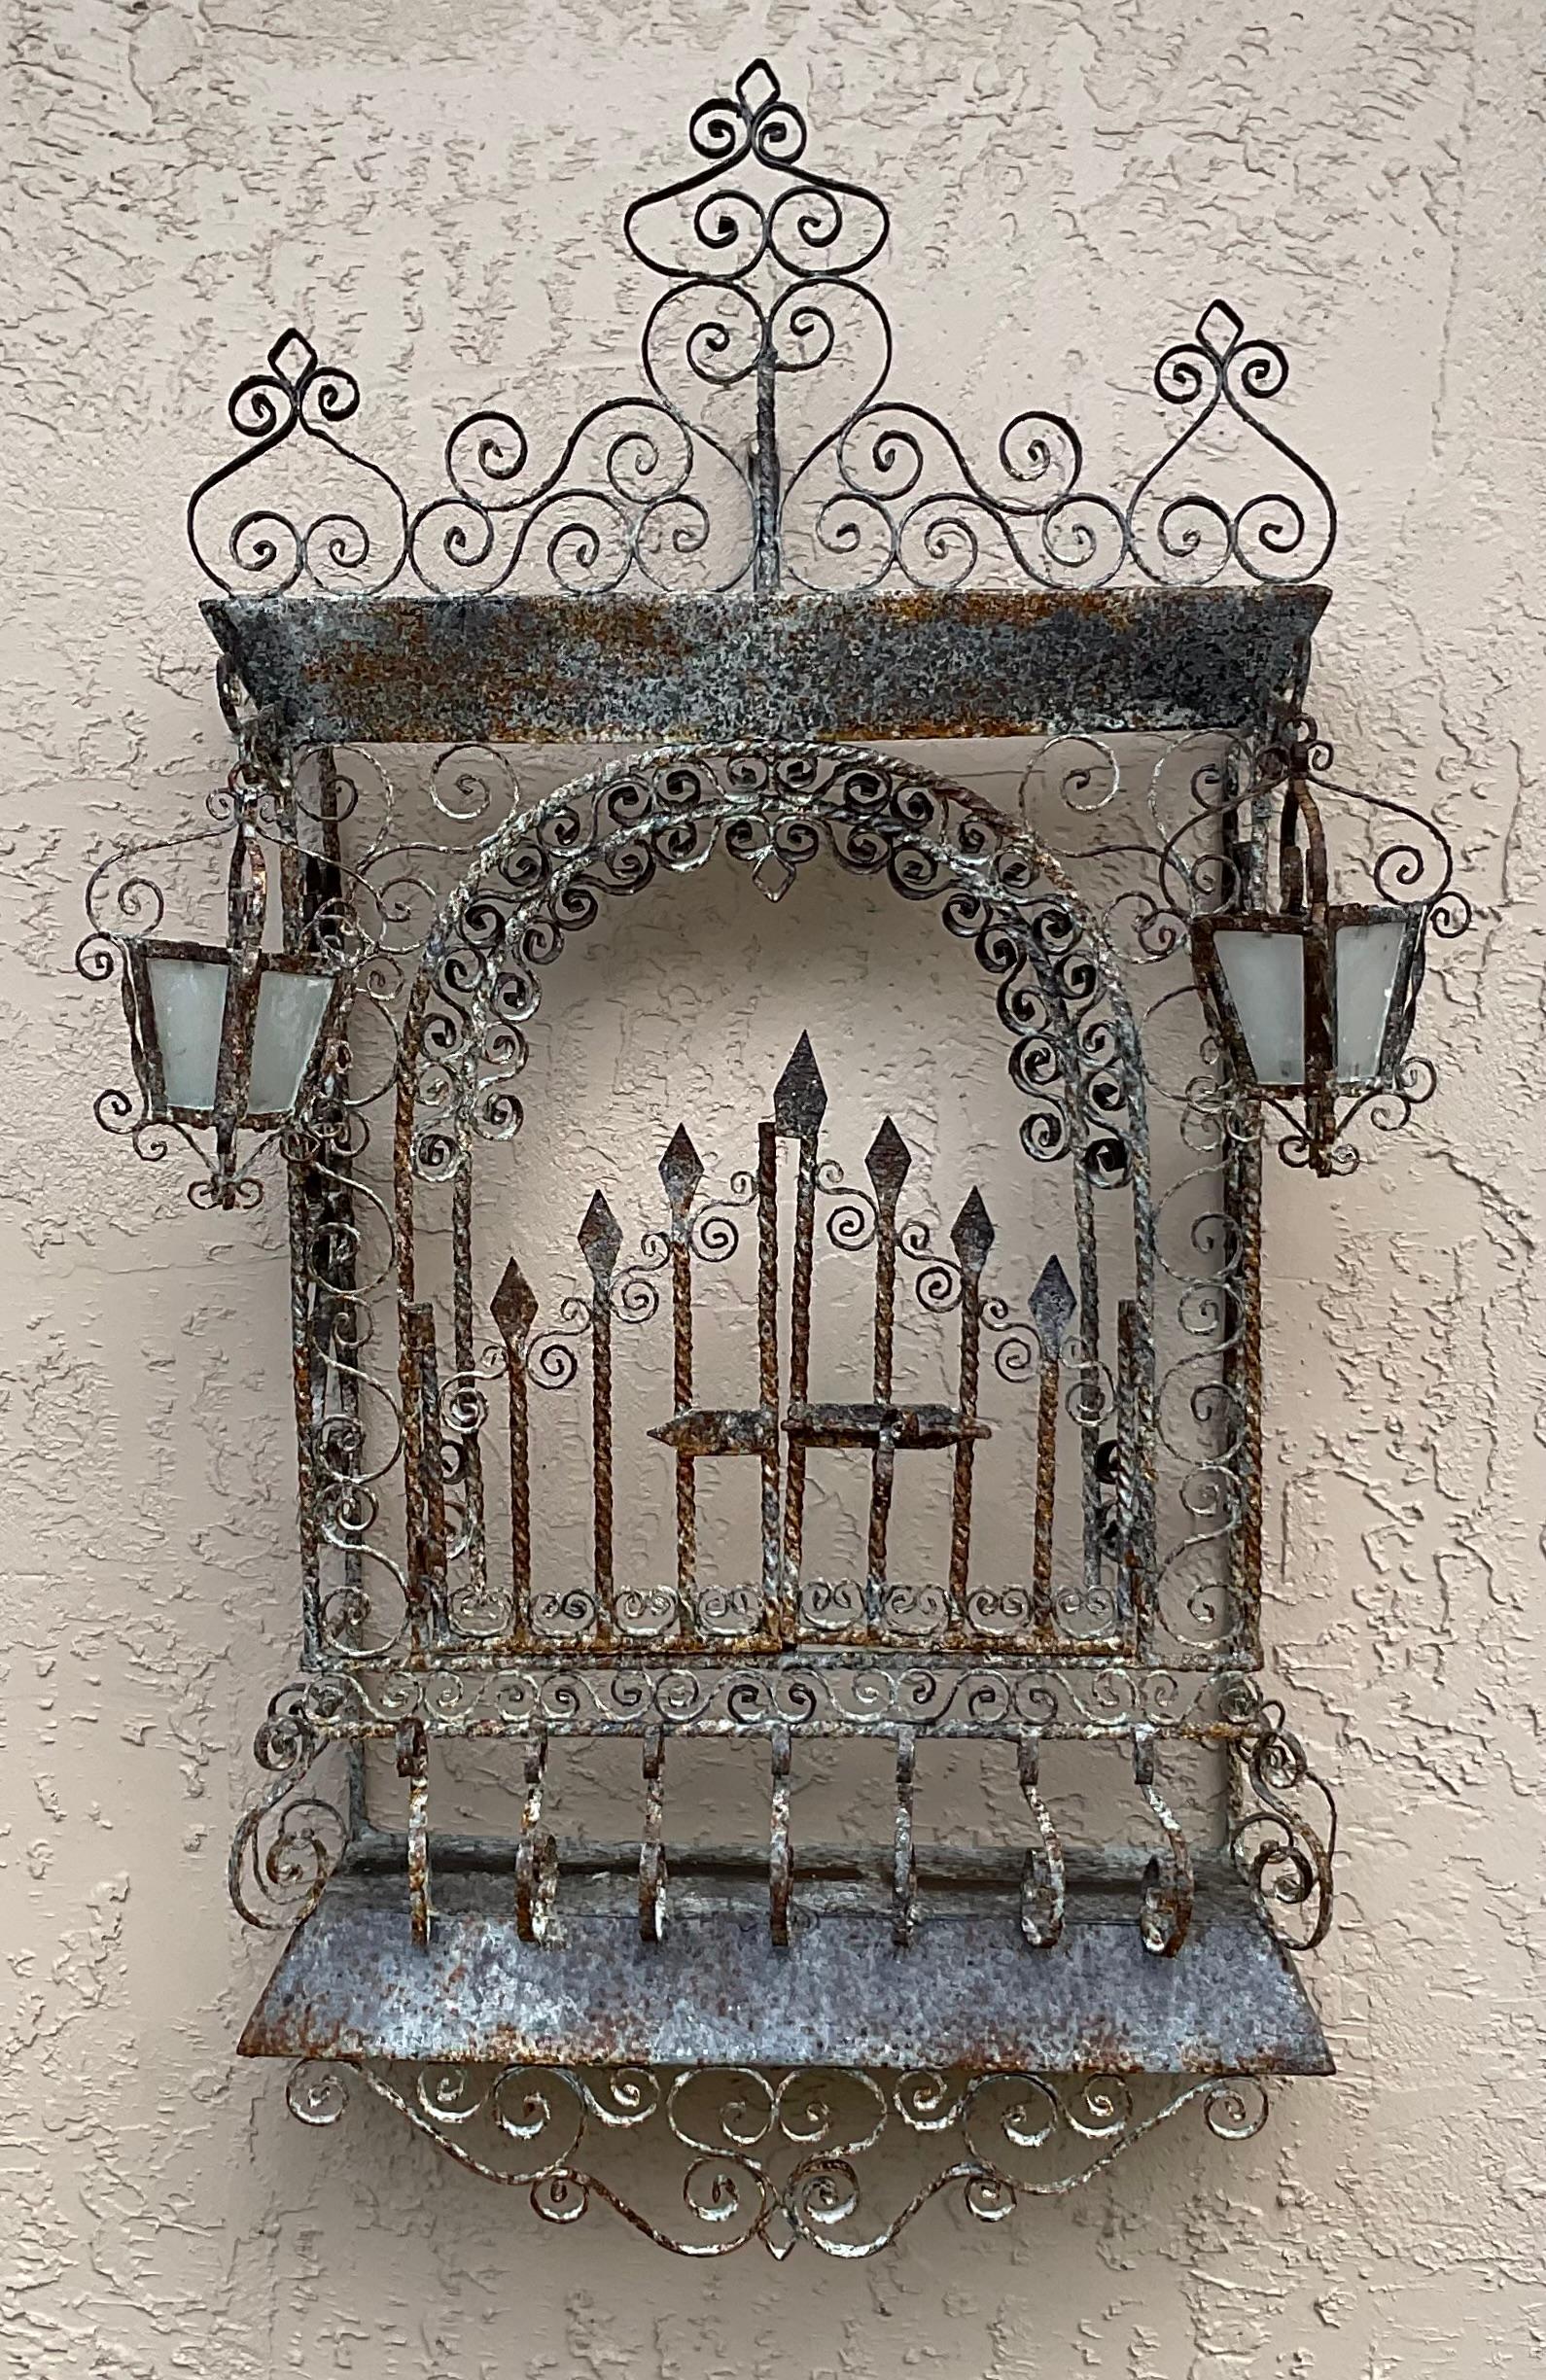 Vintage Wall Hanging Palm Beach Wrought Iron Gate Mizner Style For Sale 1